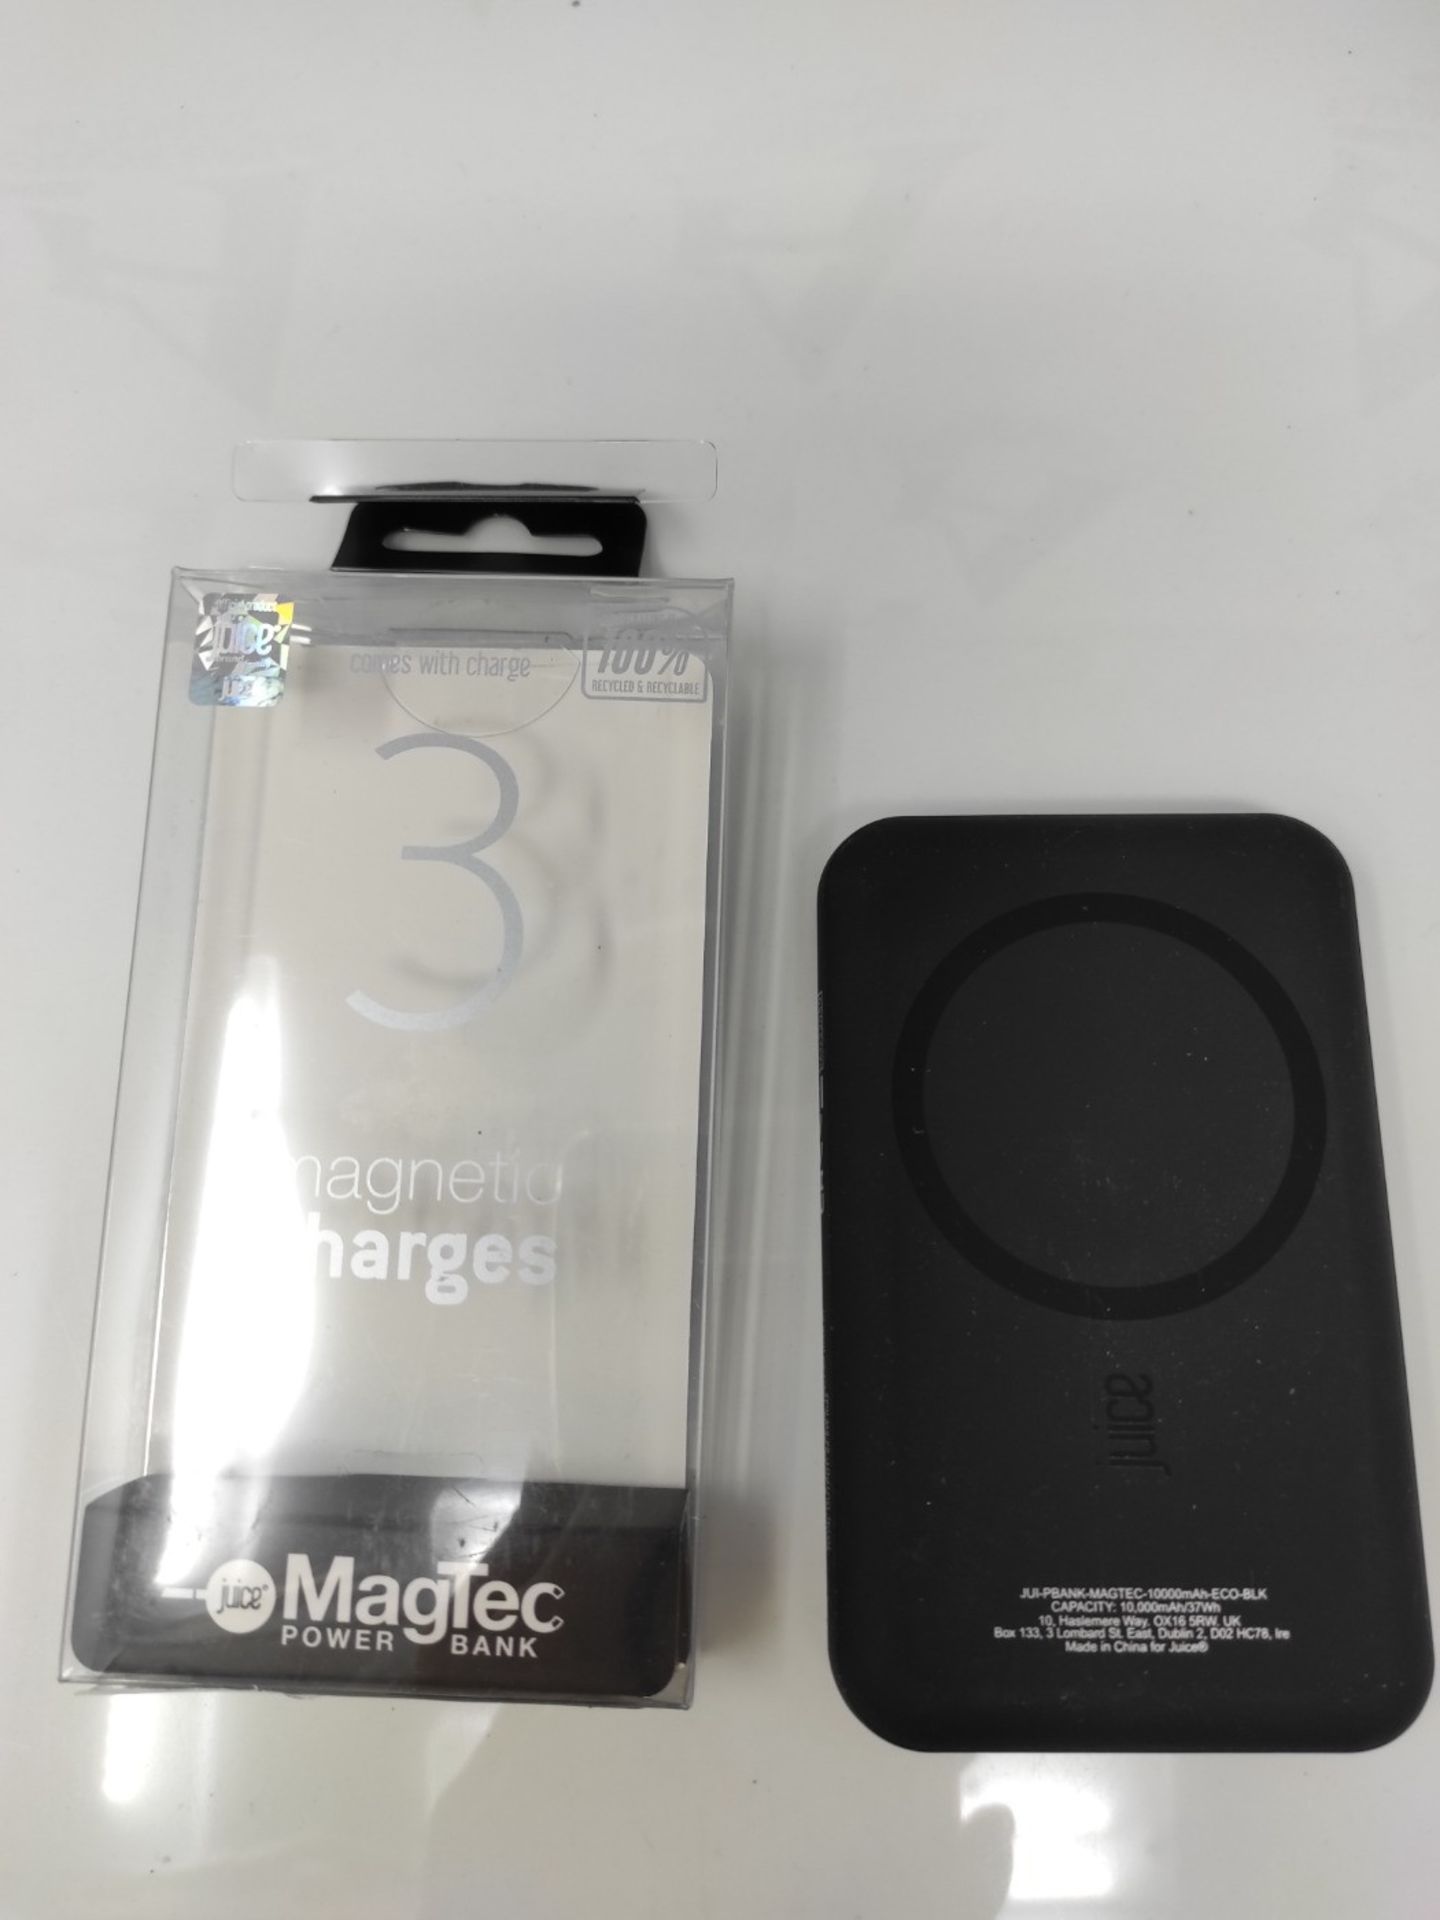 Juice MagTec, 10,000mAh Magnetic Power Bank | Magnetic Wireless Charging Portable Char - Image 2 of 2